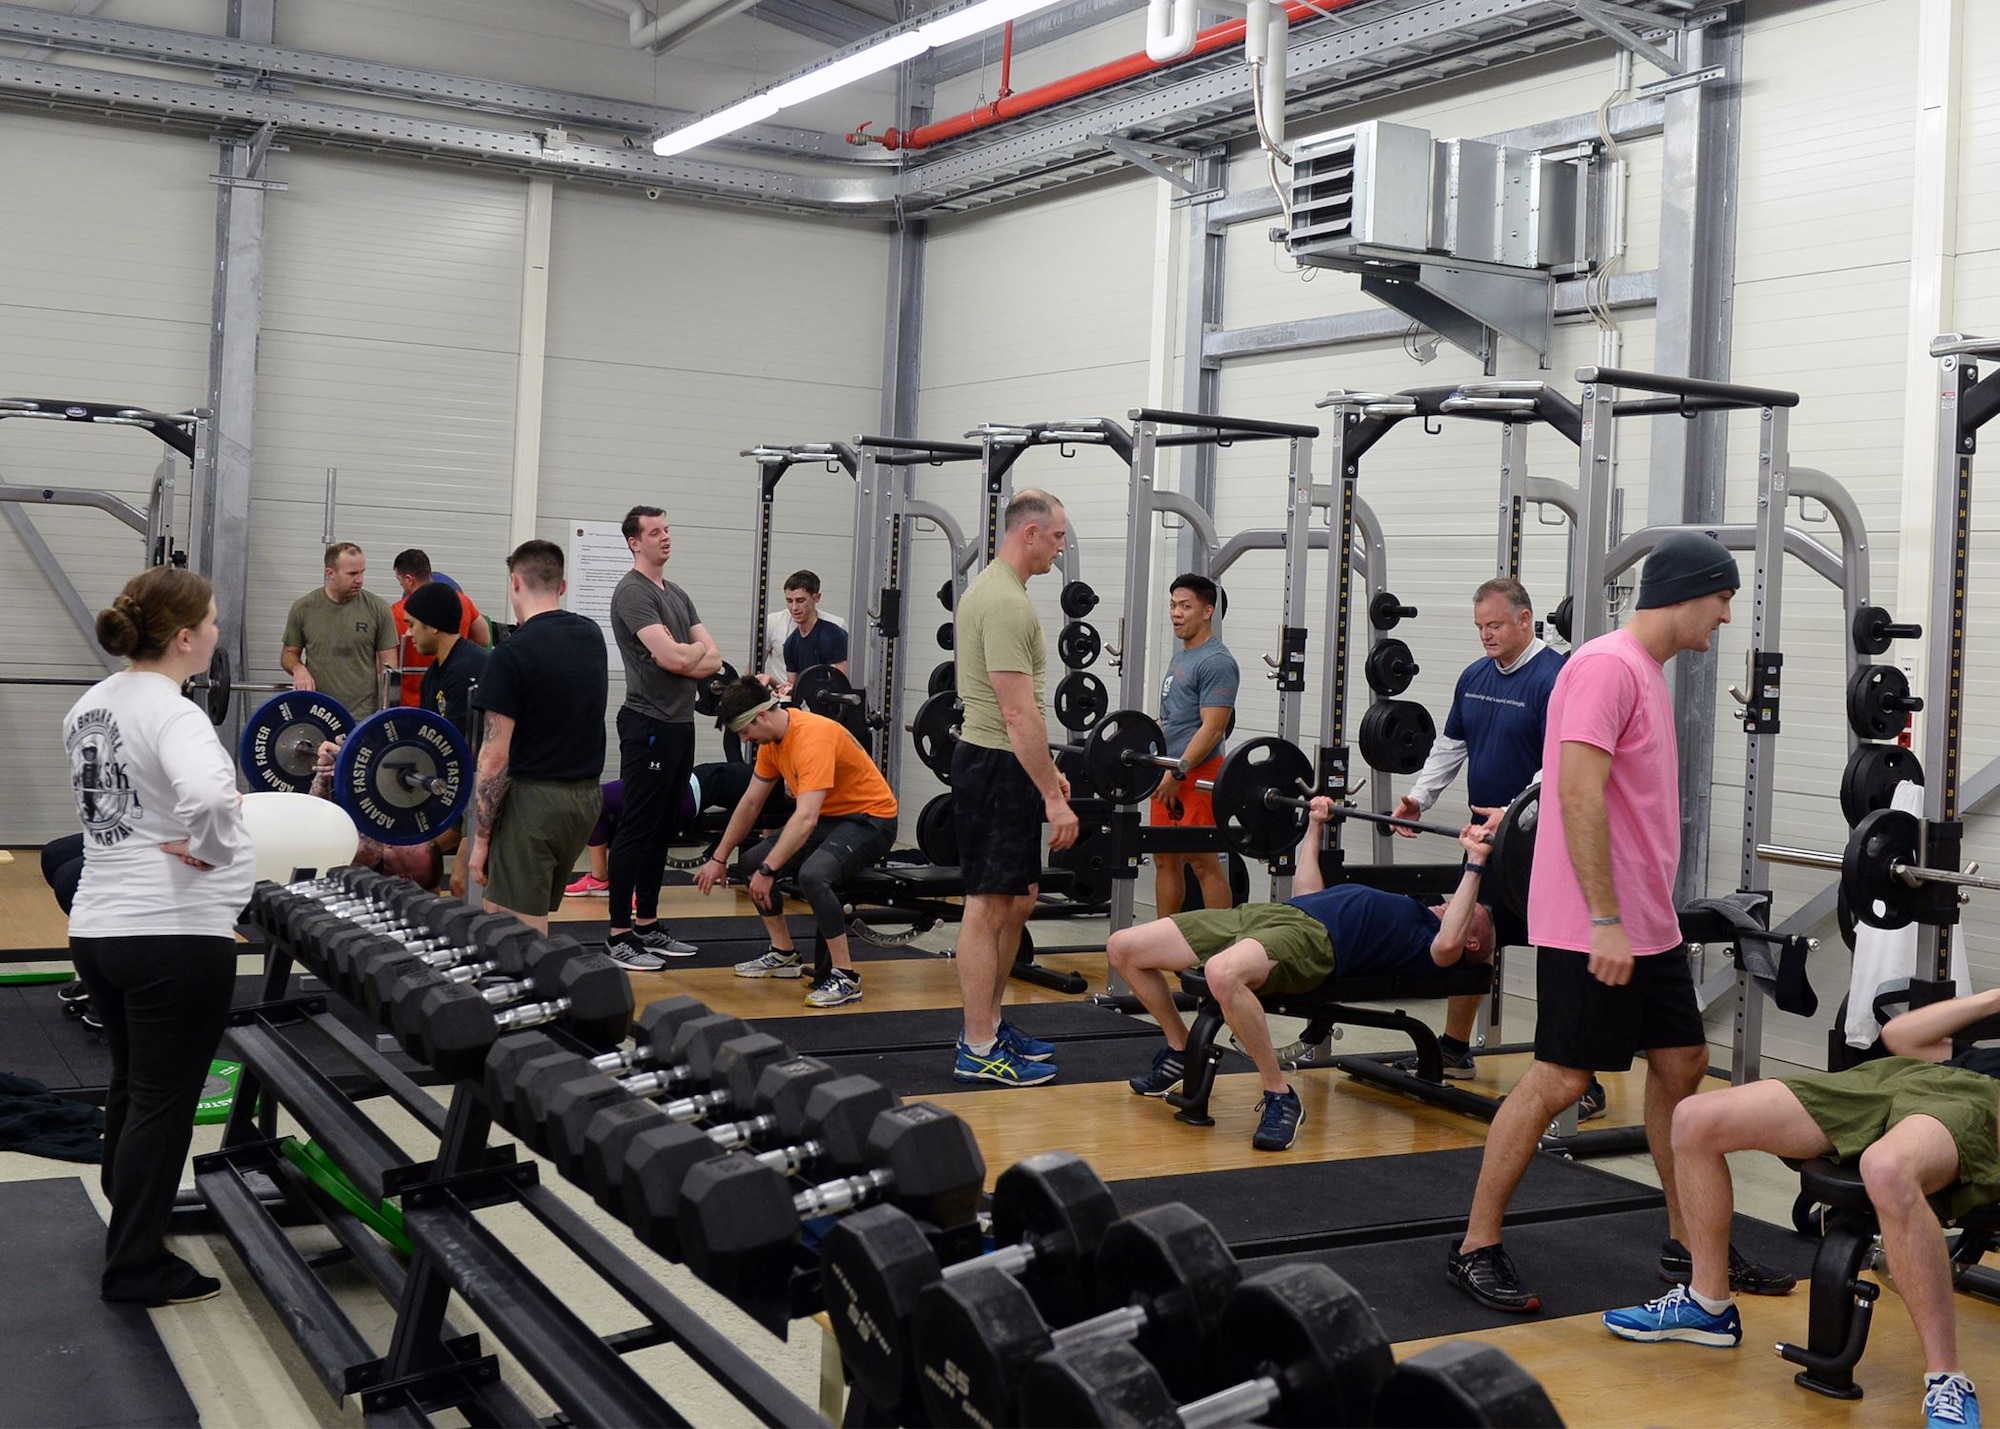 Airmen stationed at Ramstein Air Base, take part in a workout to remember and honor fallen explosive ordinance disposal Airmen who have lost their lives during service. For the workout, three-person teams were to complete a 1-mile run, 180 reps of bench-press, 180 reps of push-press, 180 reps of high-pull, and a final 1-mile run. A total of 36 Airmen from different units worked in teams to complete the workout the fastest. (U.S. Air Force photo by Senior Airman Jimmie D. Pike)